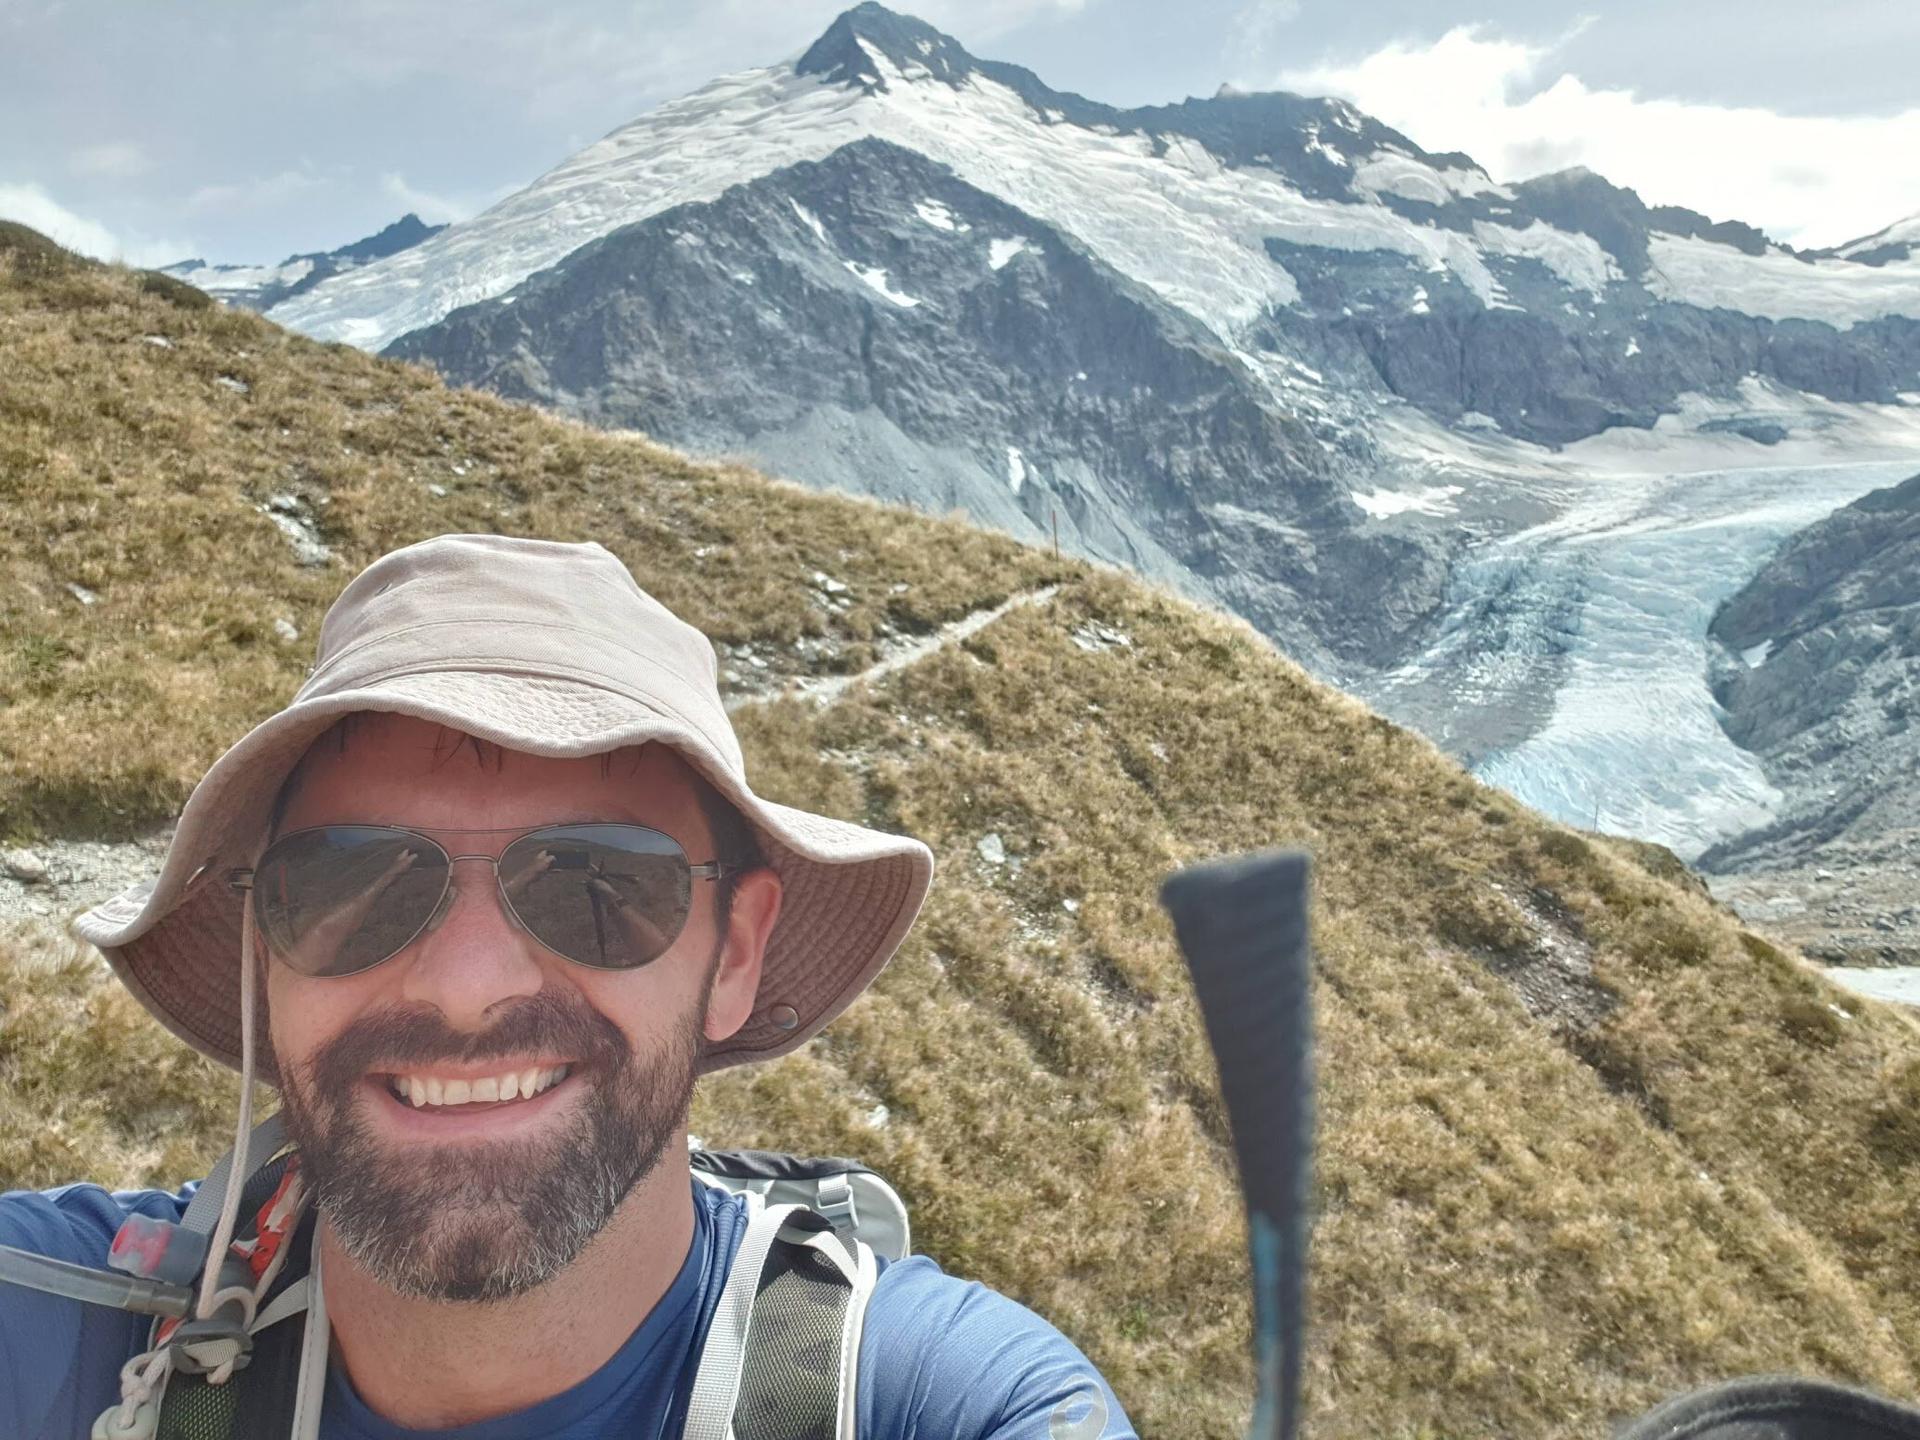 Darragh ORiordan taking a selfie with the Dart Glacier in the background.